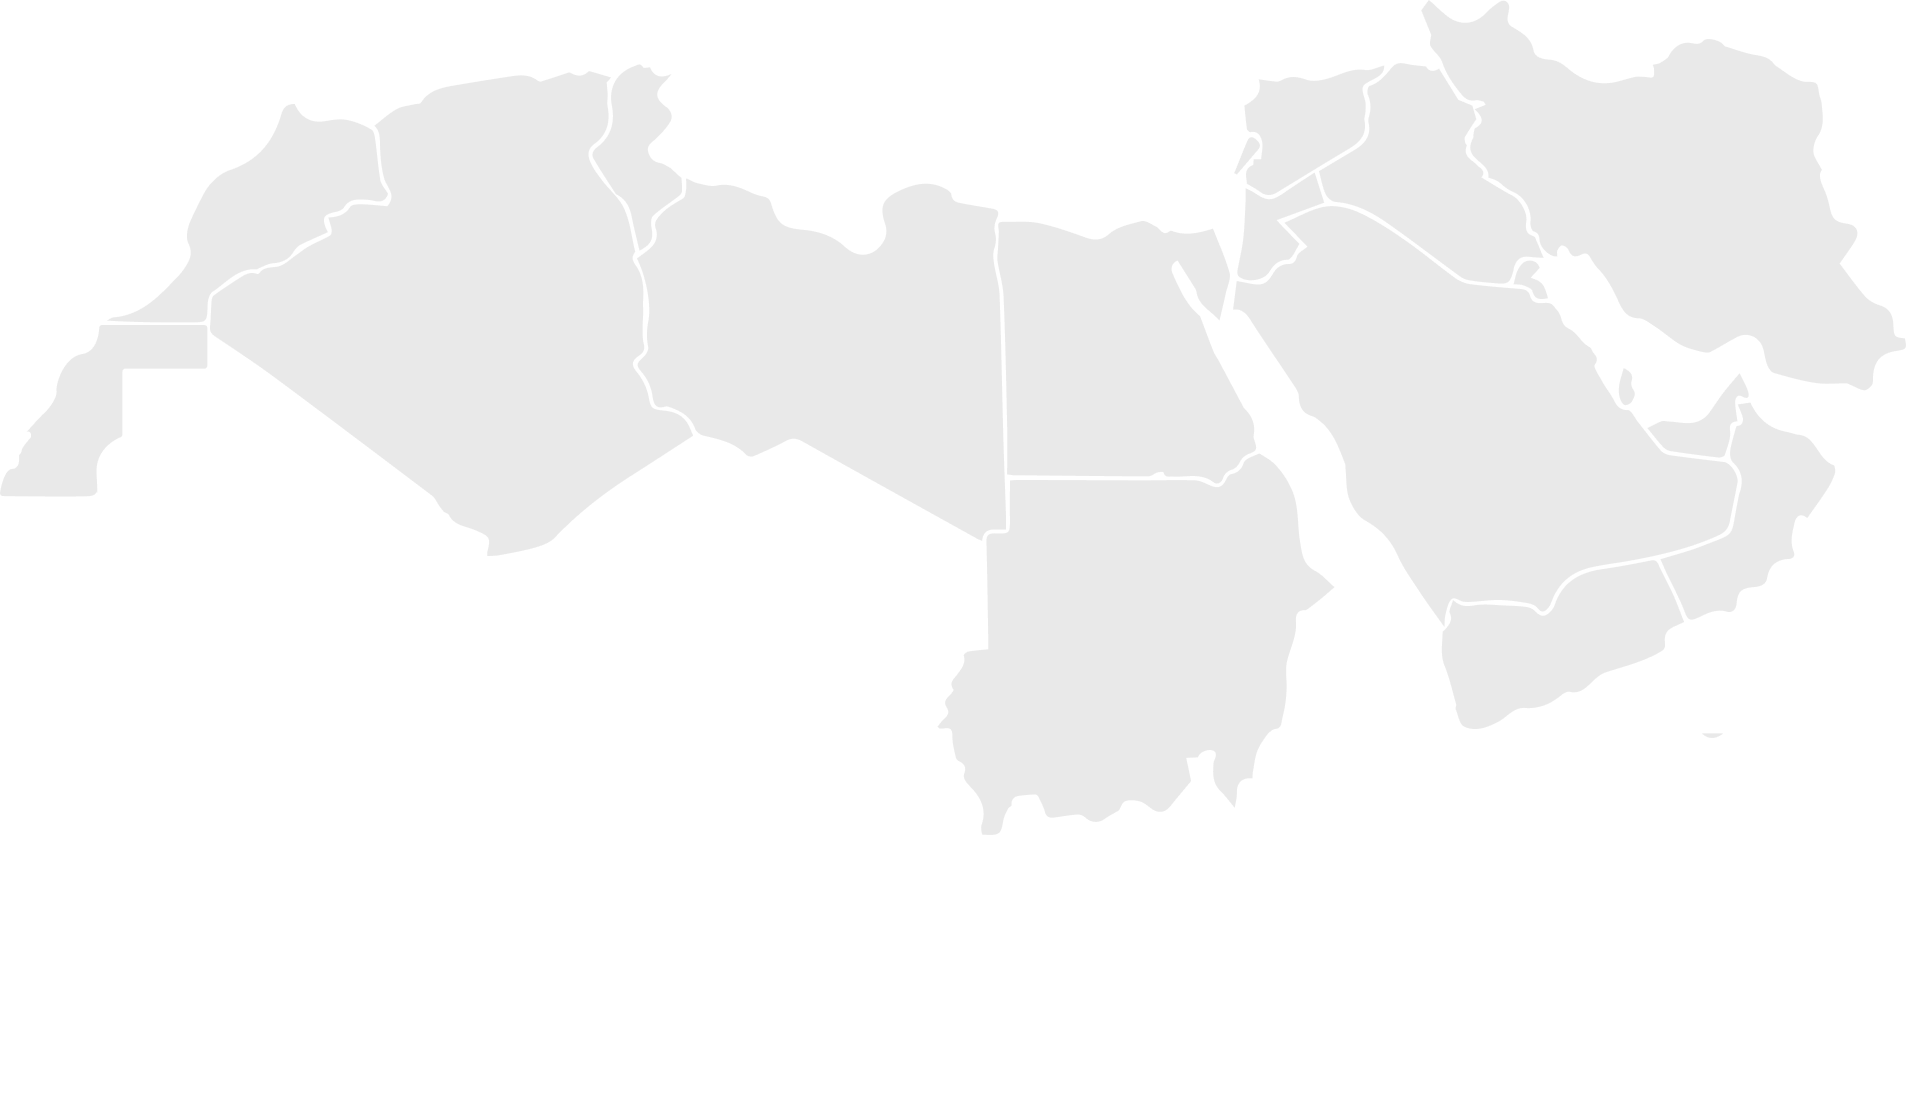 Map showing MENA panel of test participants